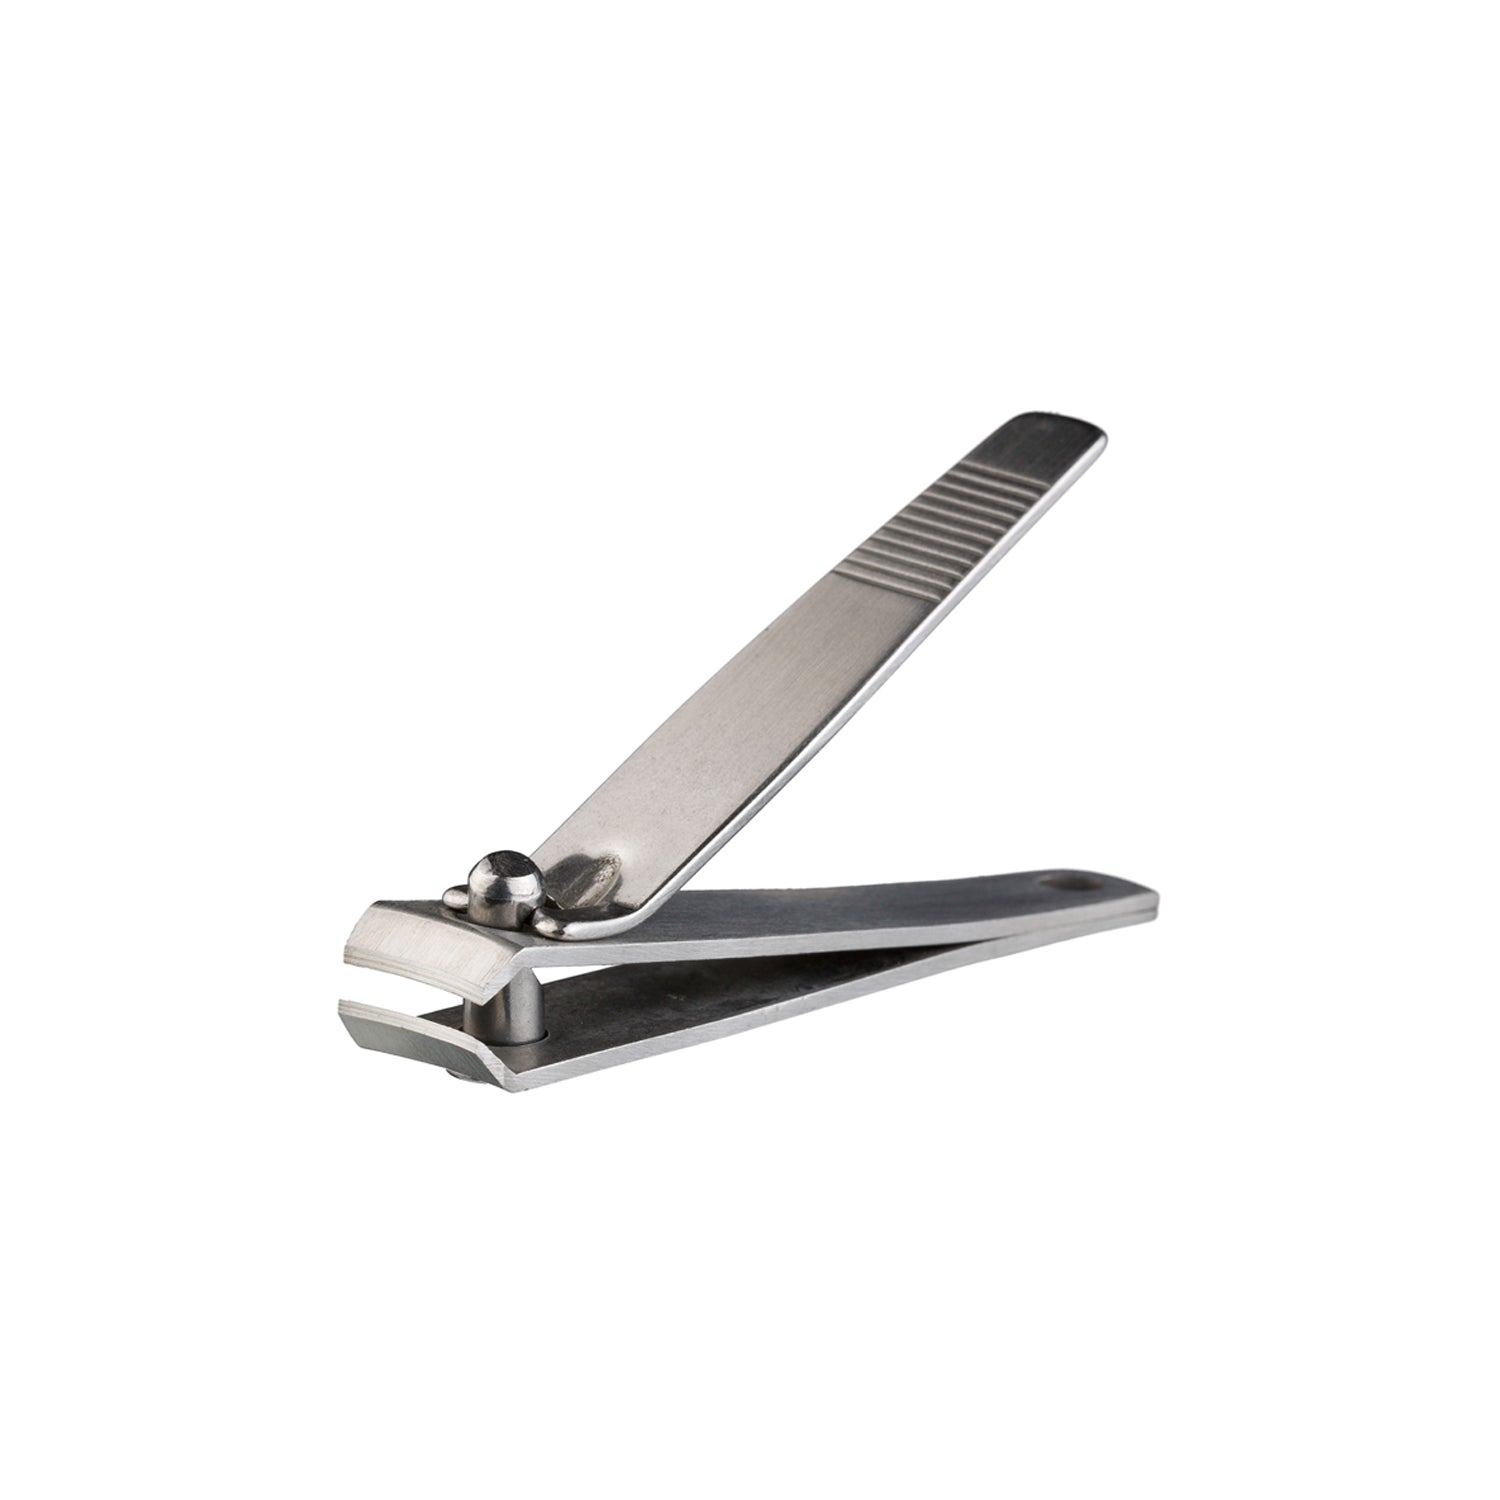 1267 Stainless Steel Nail Cutter - Smooth Curvy Edges to Fit in The Natural Curves of Your Nails ( 1 pcs ) DeoDap